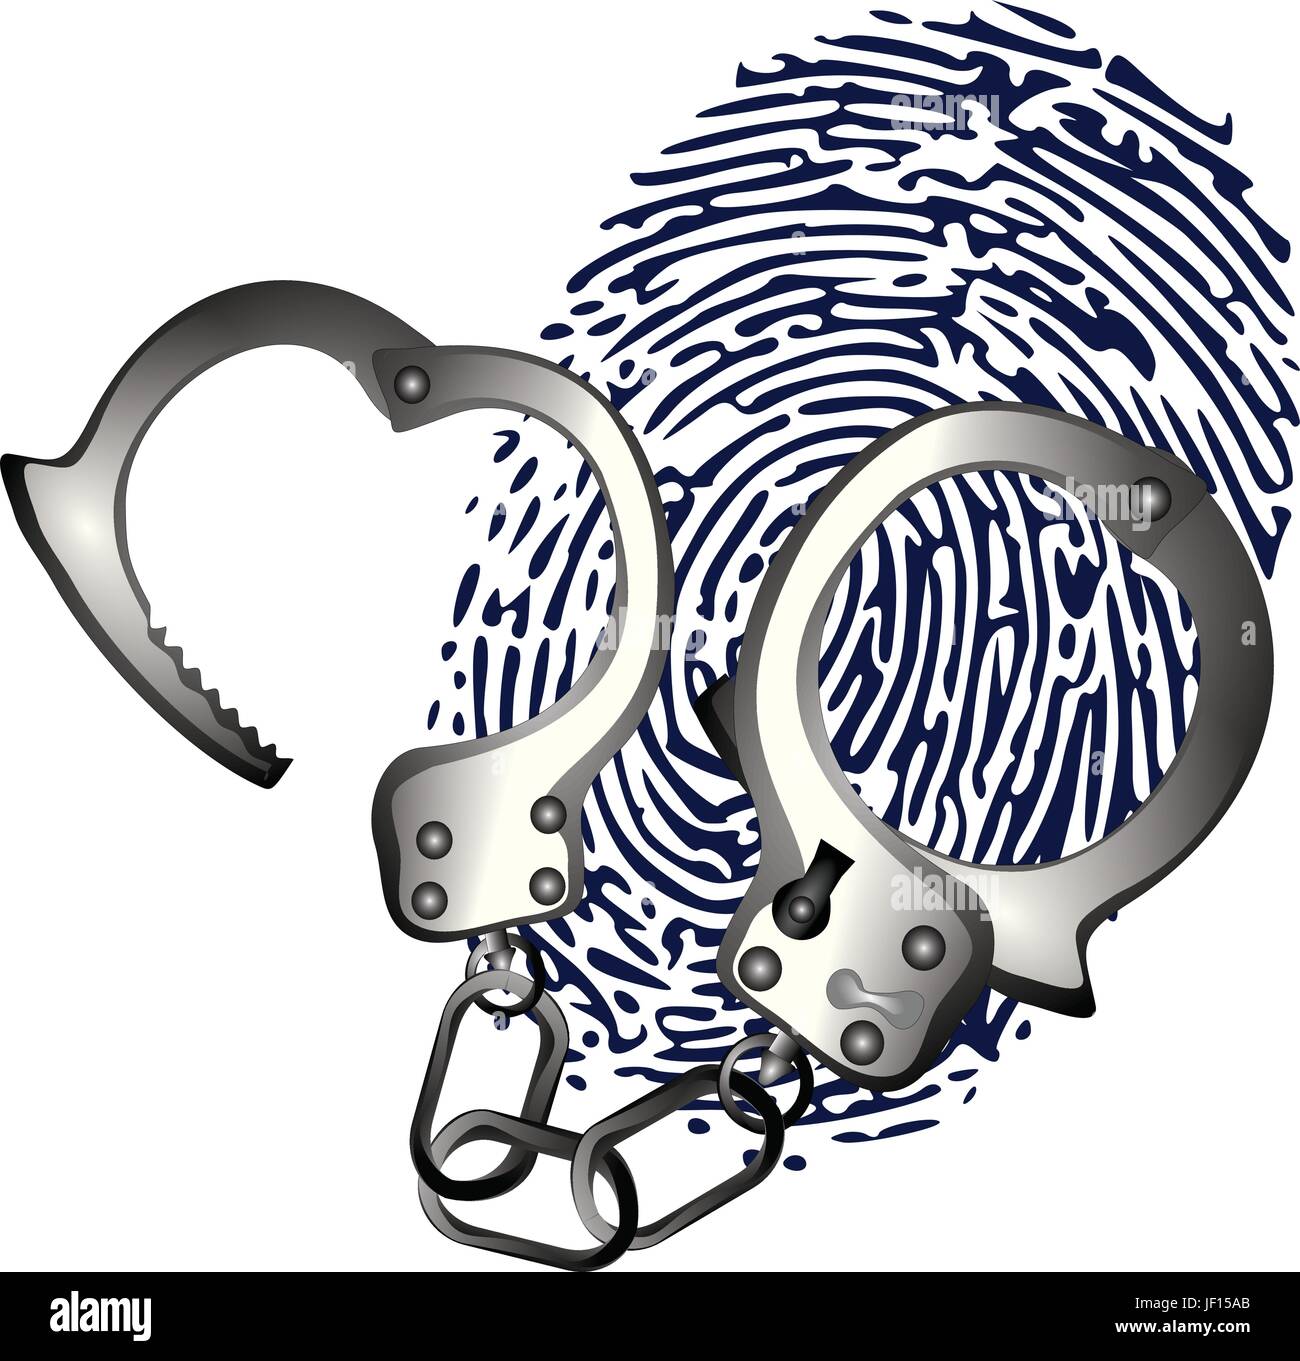 crime, identity, criminal, identification, thumbprint, security, safety, Stock Vector